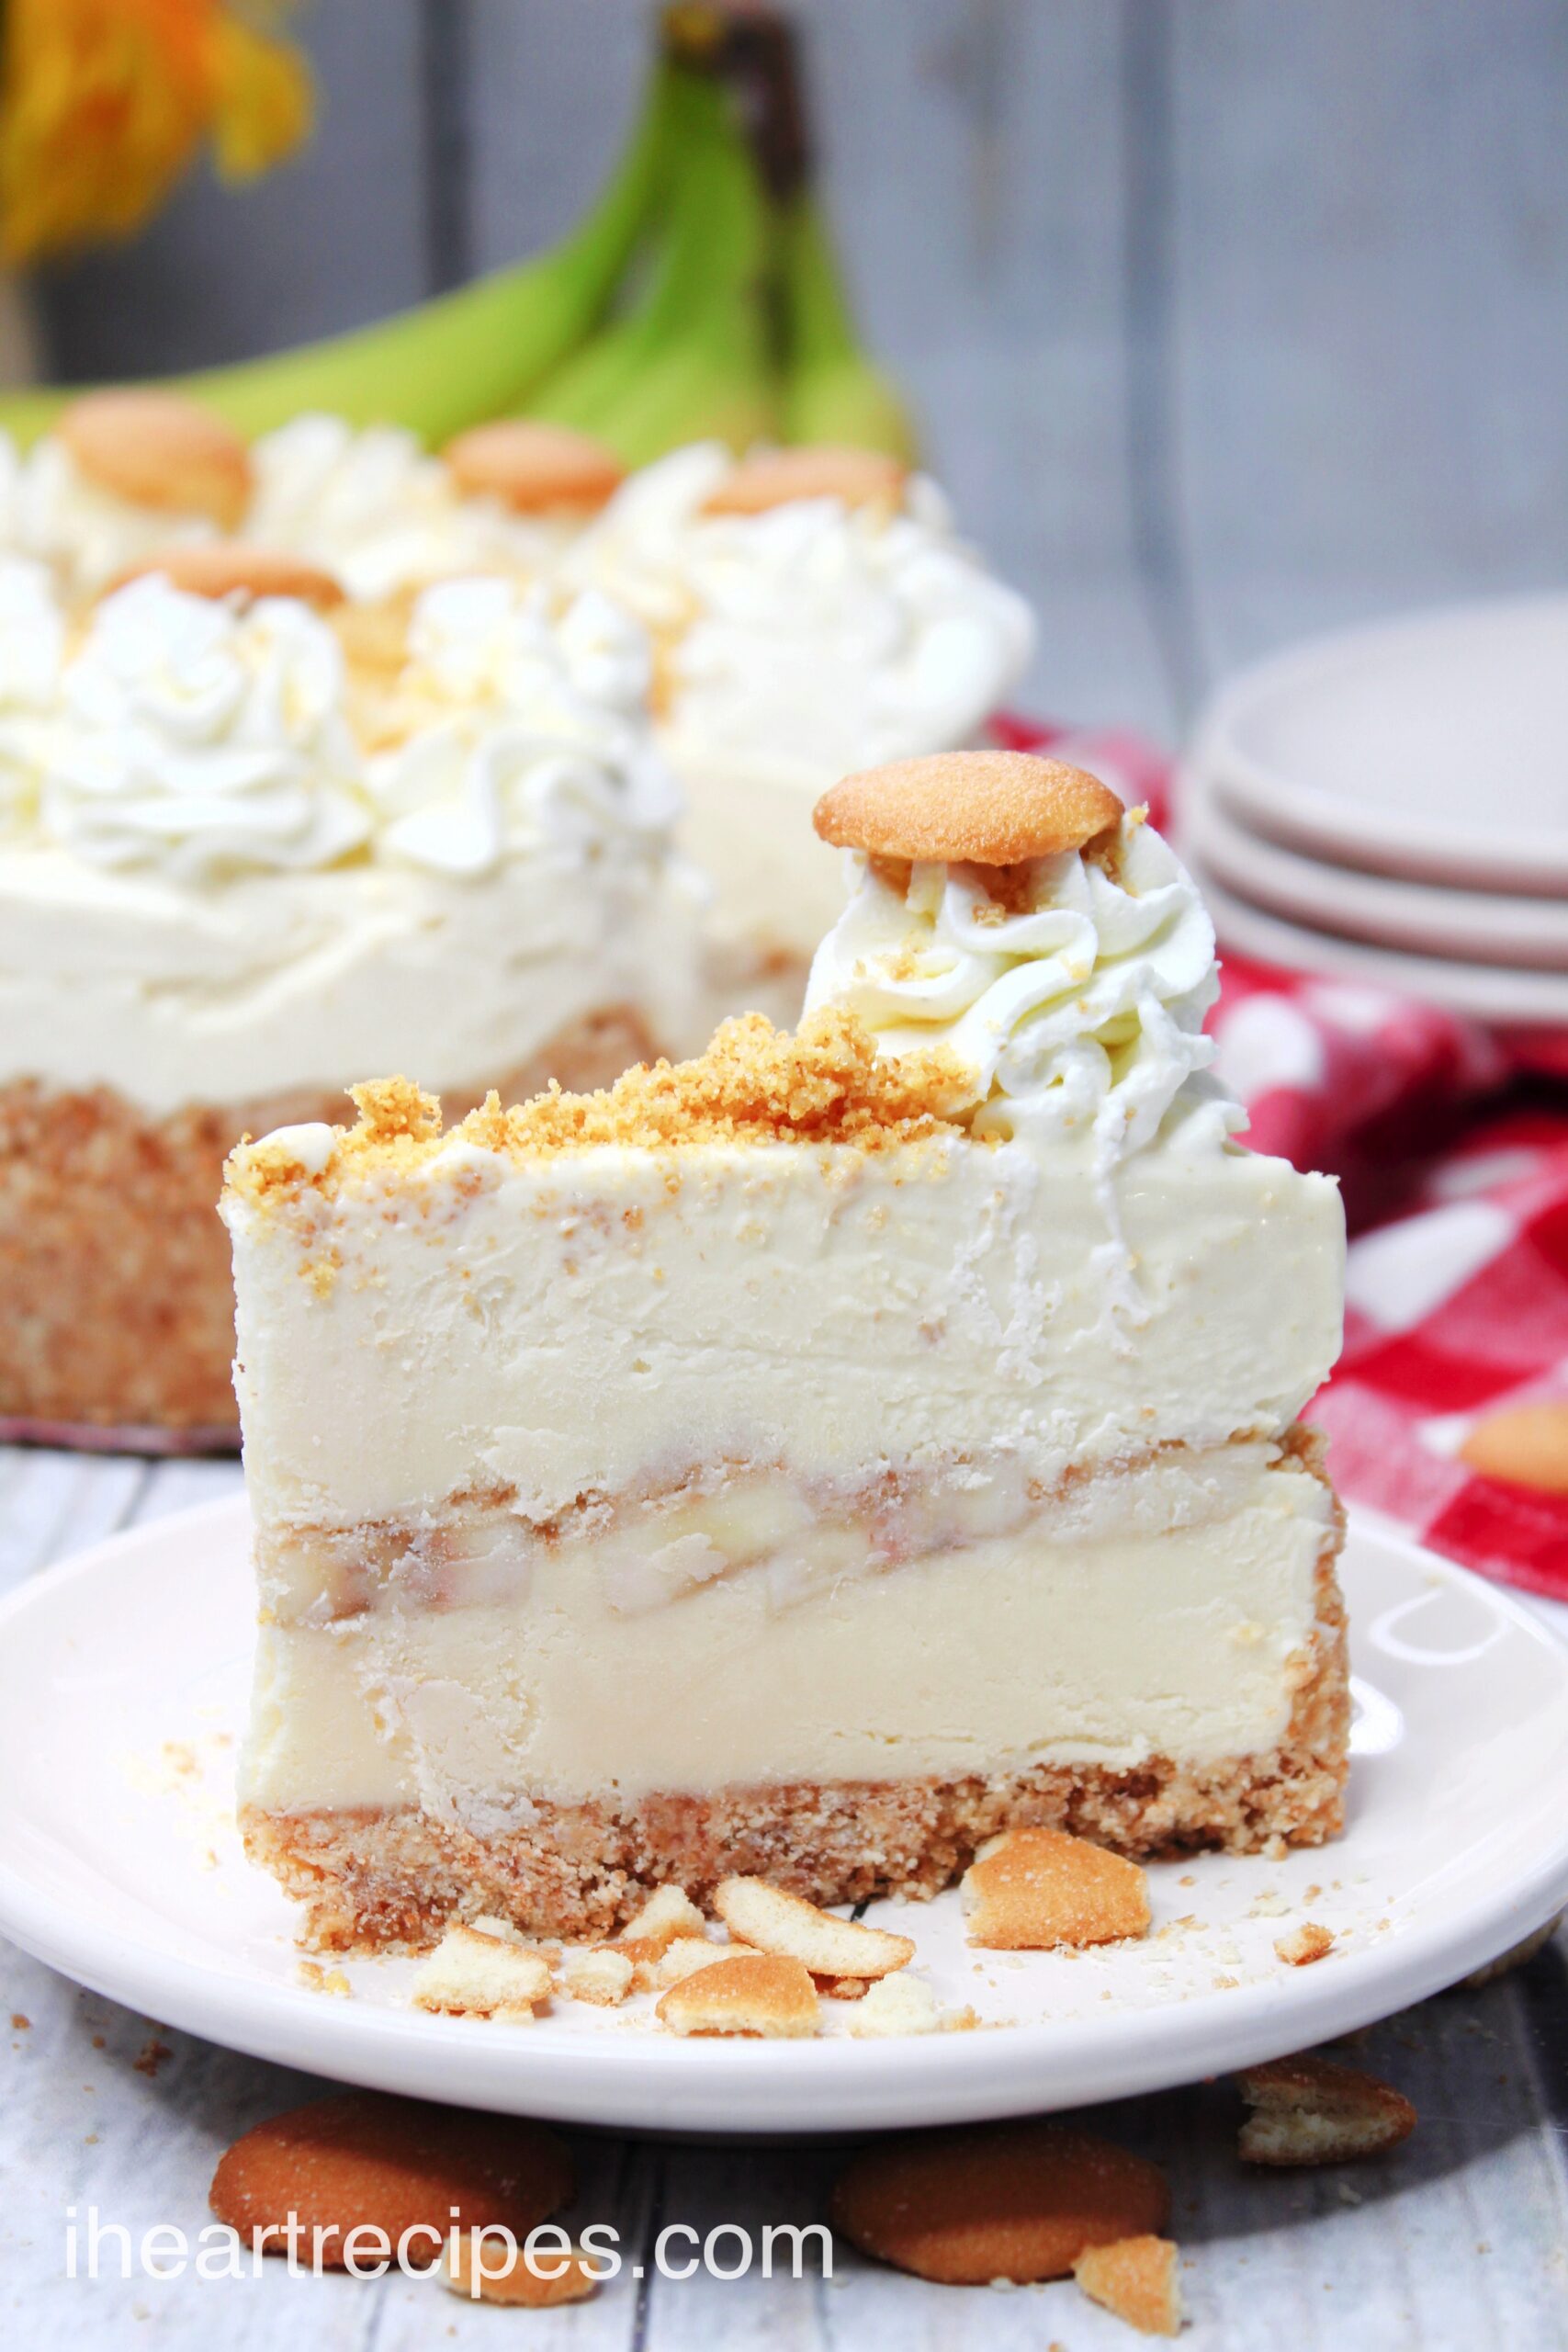 A single slice of banana pudding cheesecake. The slice has layers of ingredients - a vanilla wafer base, vanilla cheesecake, sliced bananas, and a banana pudding topping with whipped cream and crushed vanilla wafers.